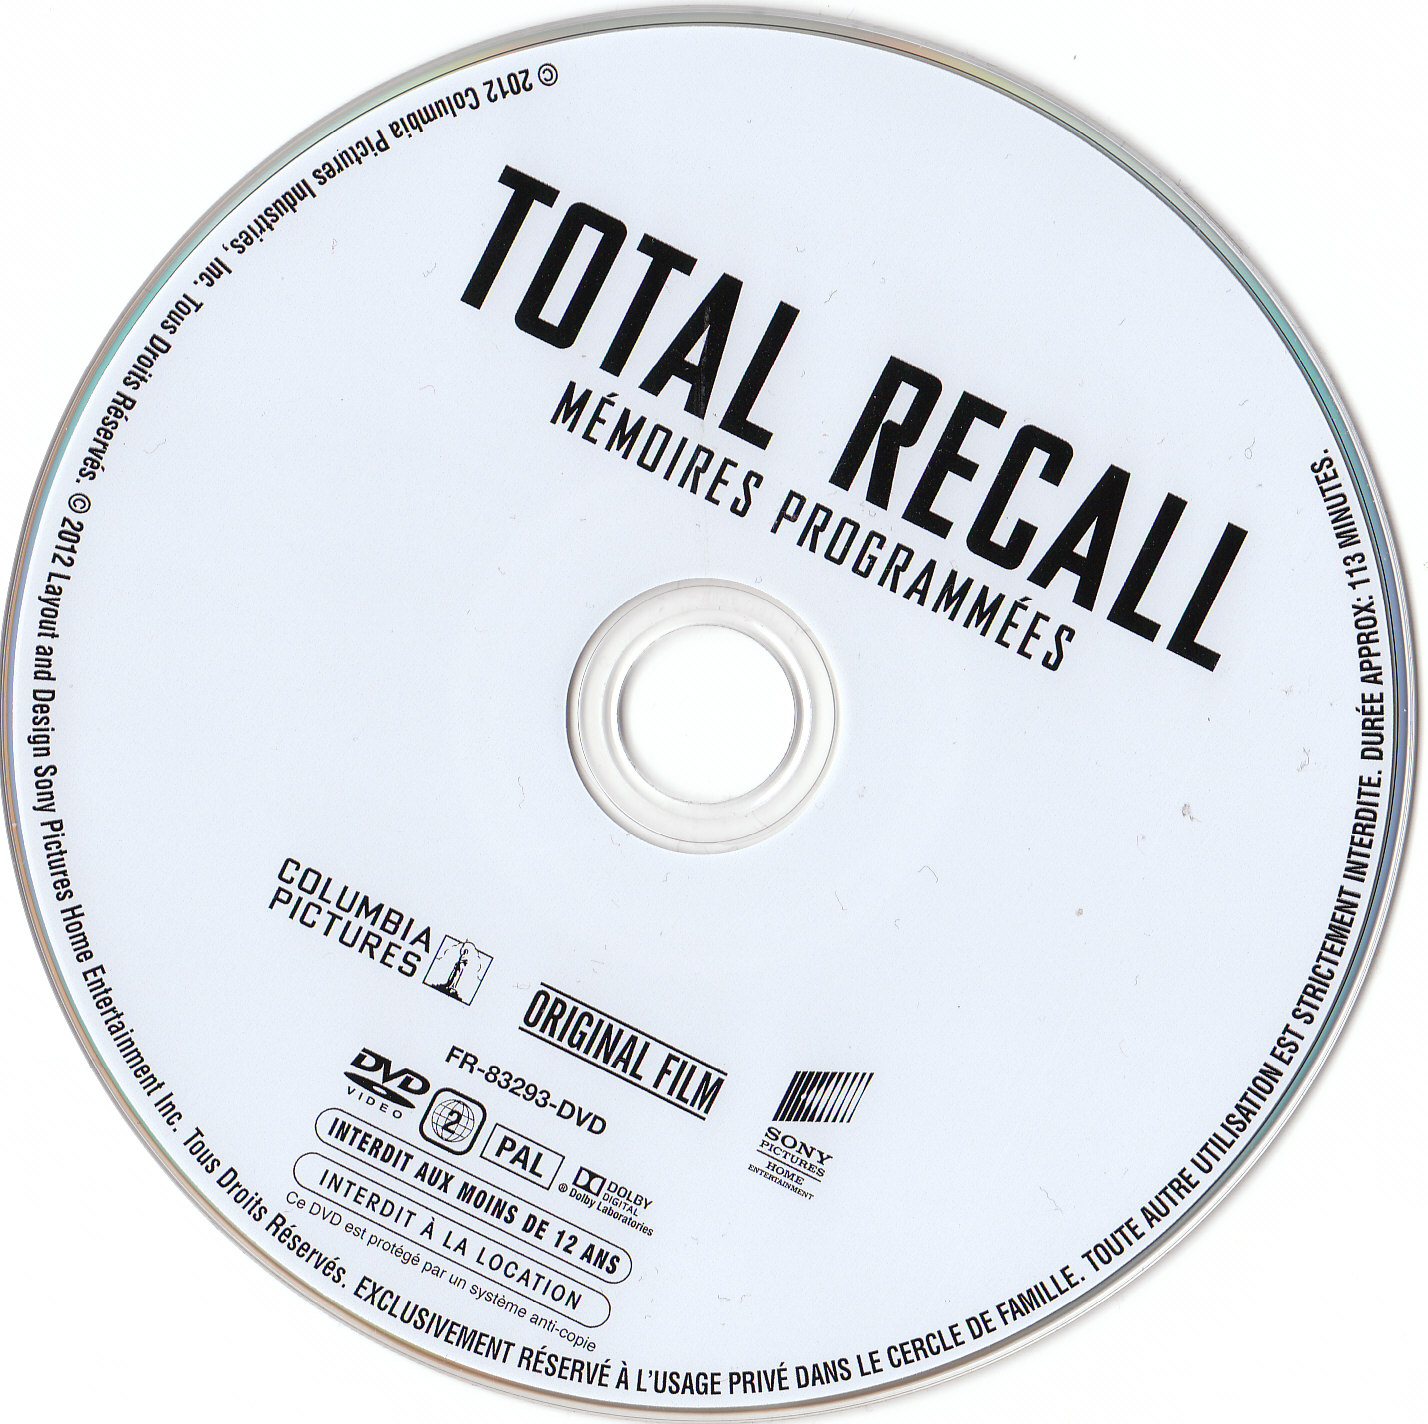 Total recall mmoires programmes